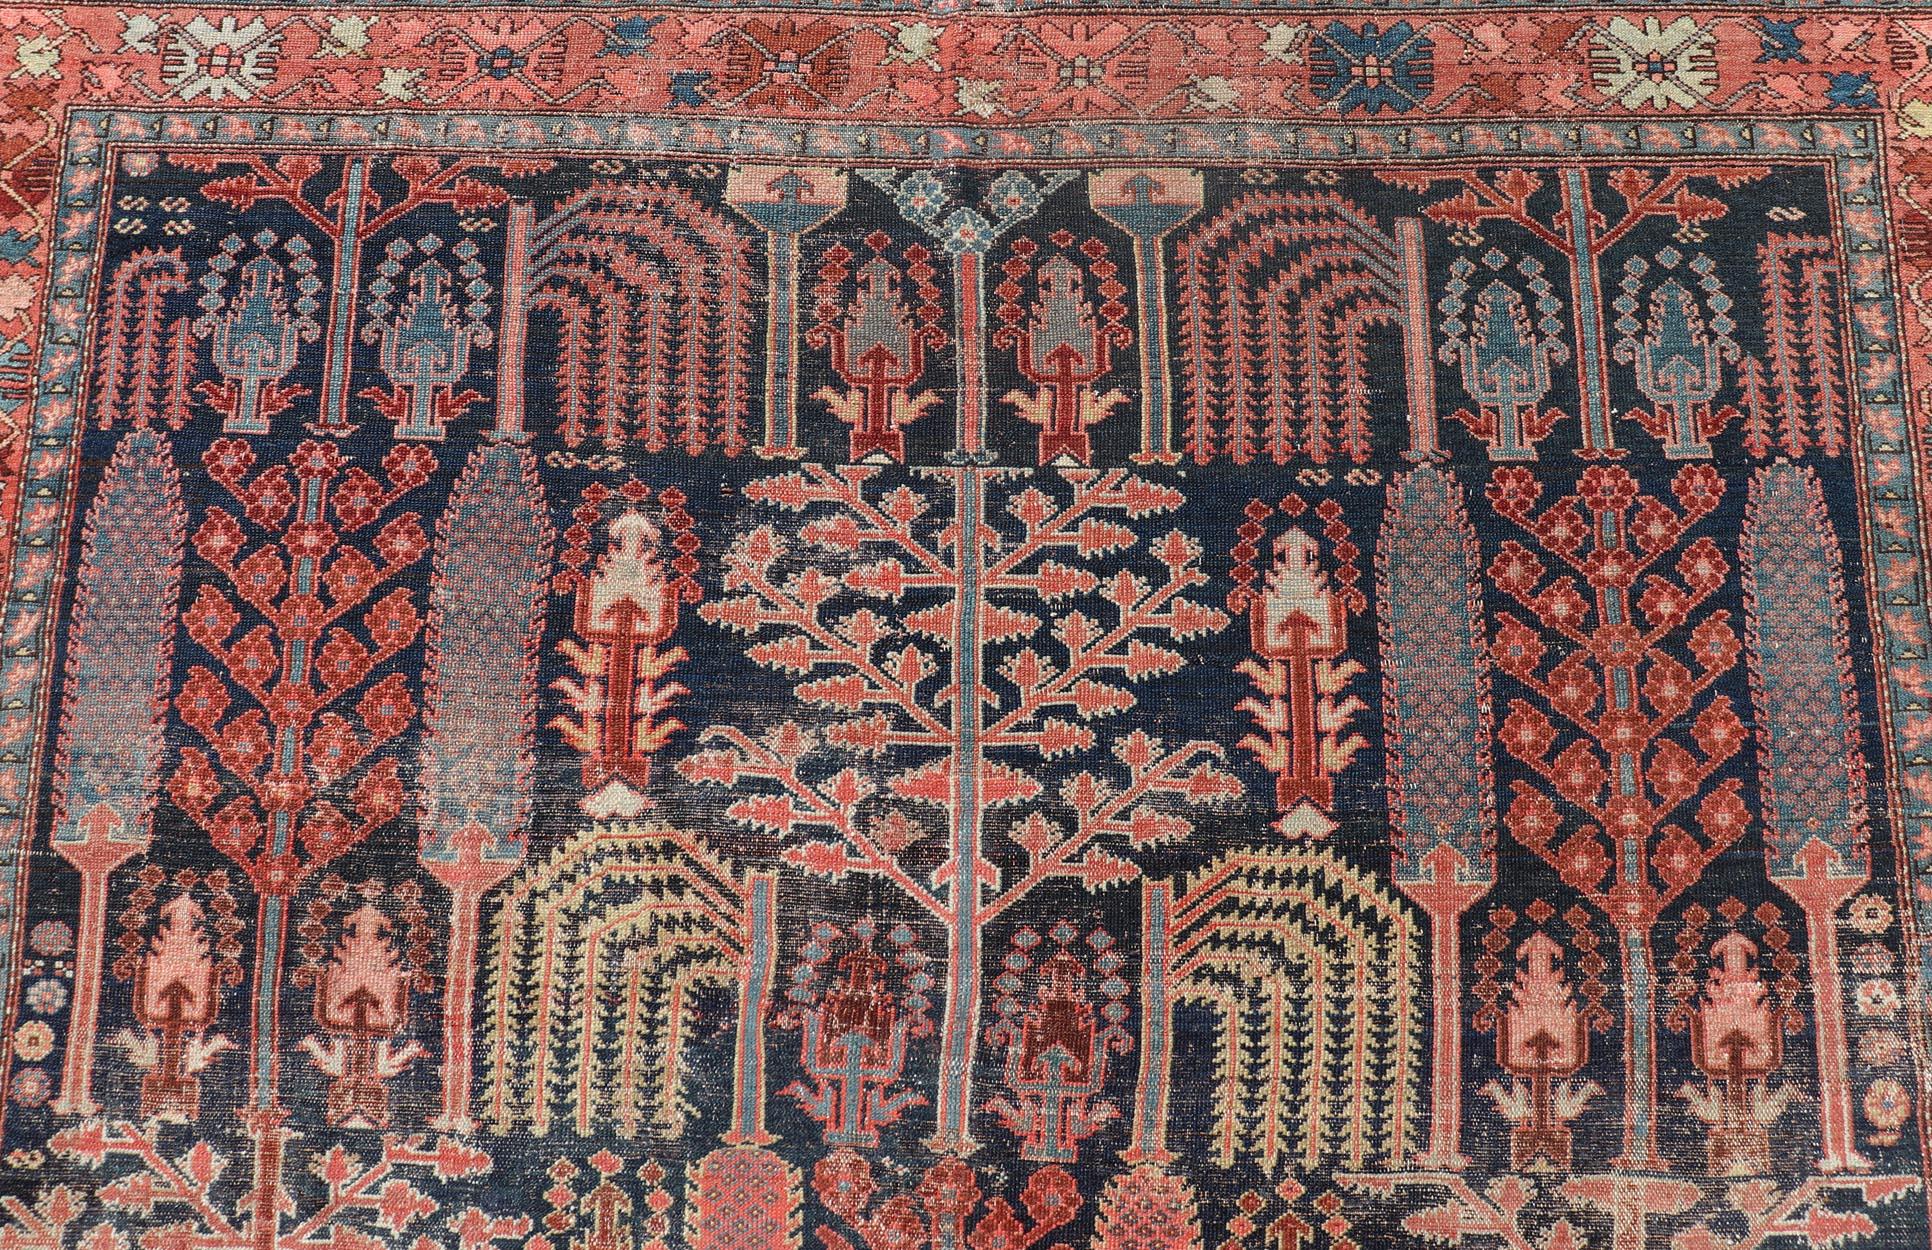 Antique Persian Bakhshaish Rug with All-Over Tree and Willow Design For Sale 7